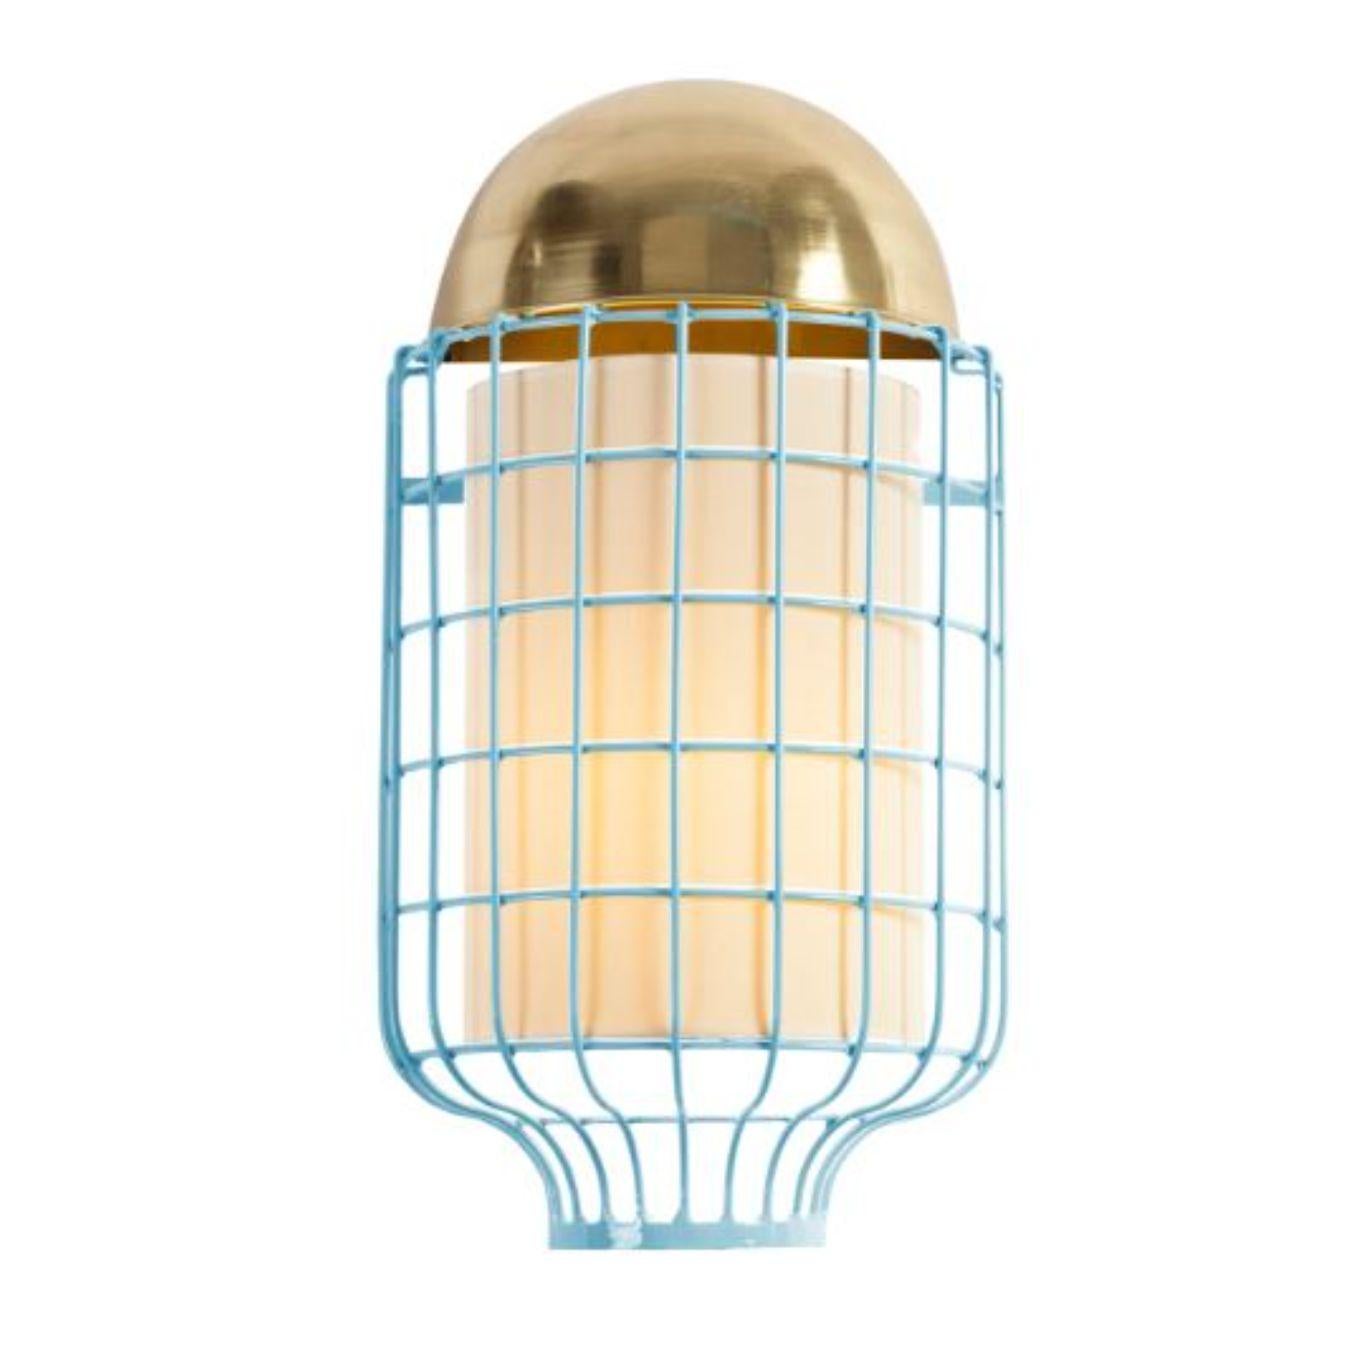 Brass and Jade Magnolia wall lamp by Dooq
Dimensions: W 30 x D 13 x H 56 cm
Materials: lacquered metal, polished or brushed metal, brass.
abat-jour: cotton
Also available in different colours and materials.

Information:
230V/50Hz
E14/1x15W